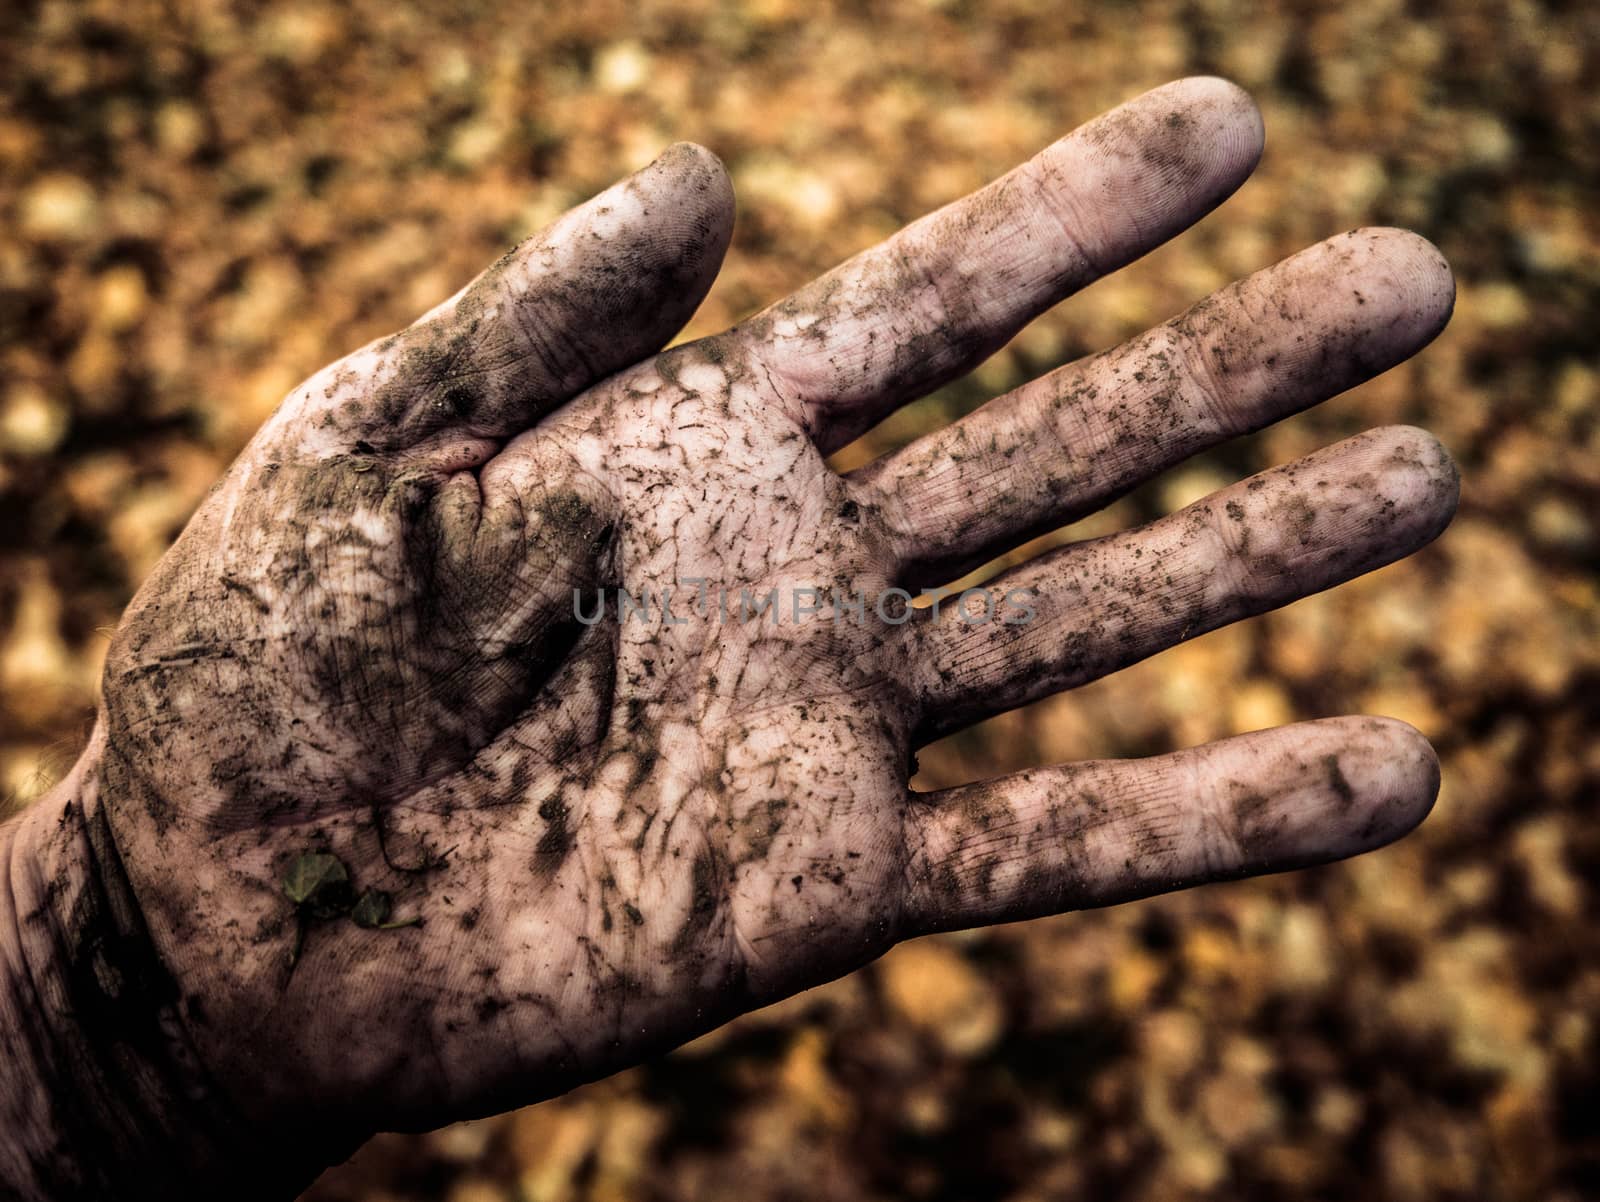 The Dirty Hand Of A Farmer Or Gardener Outside In Autumn